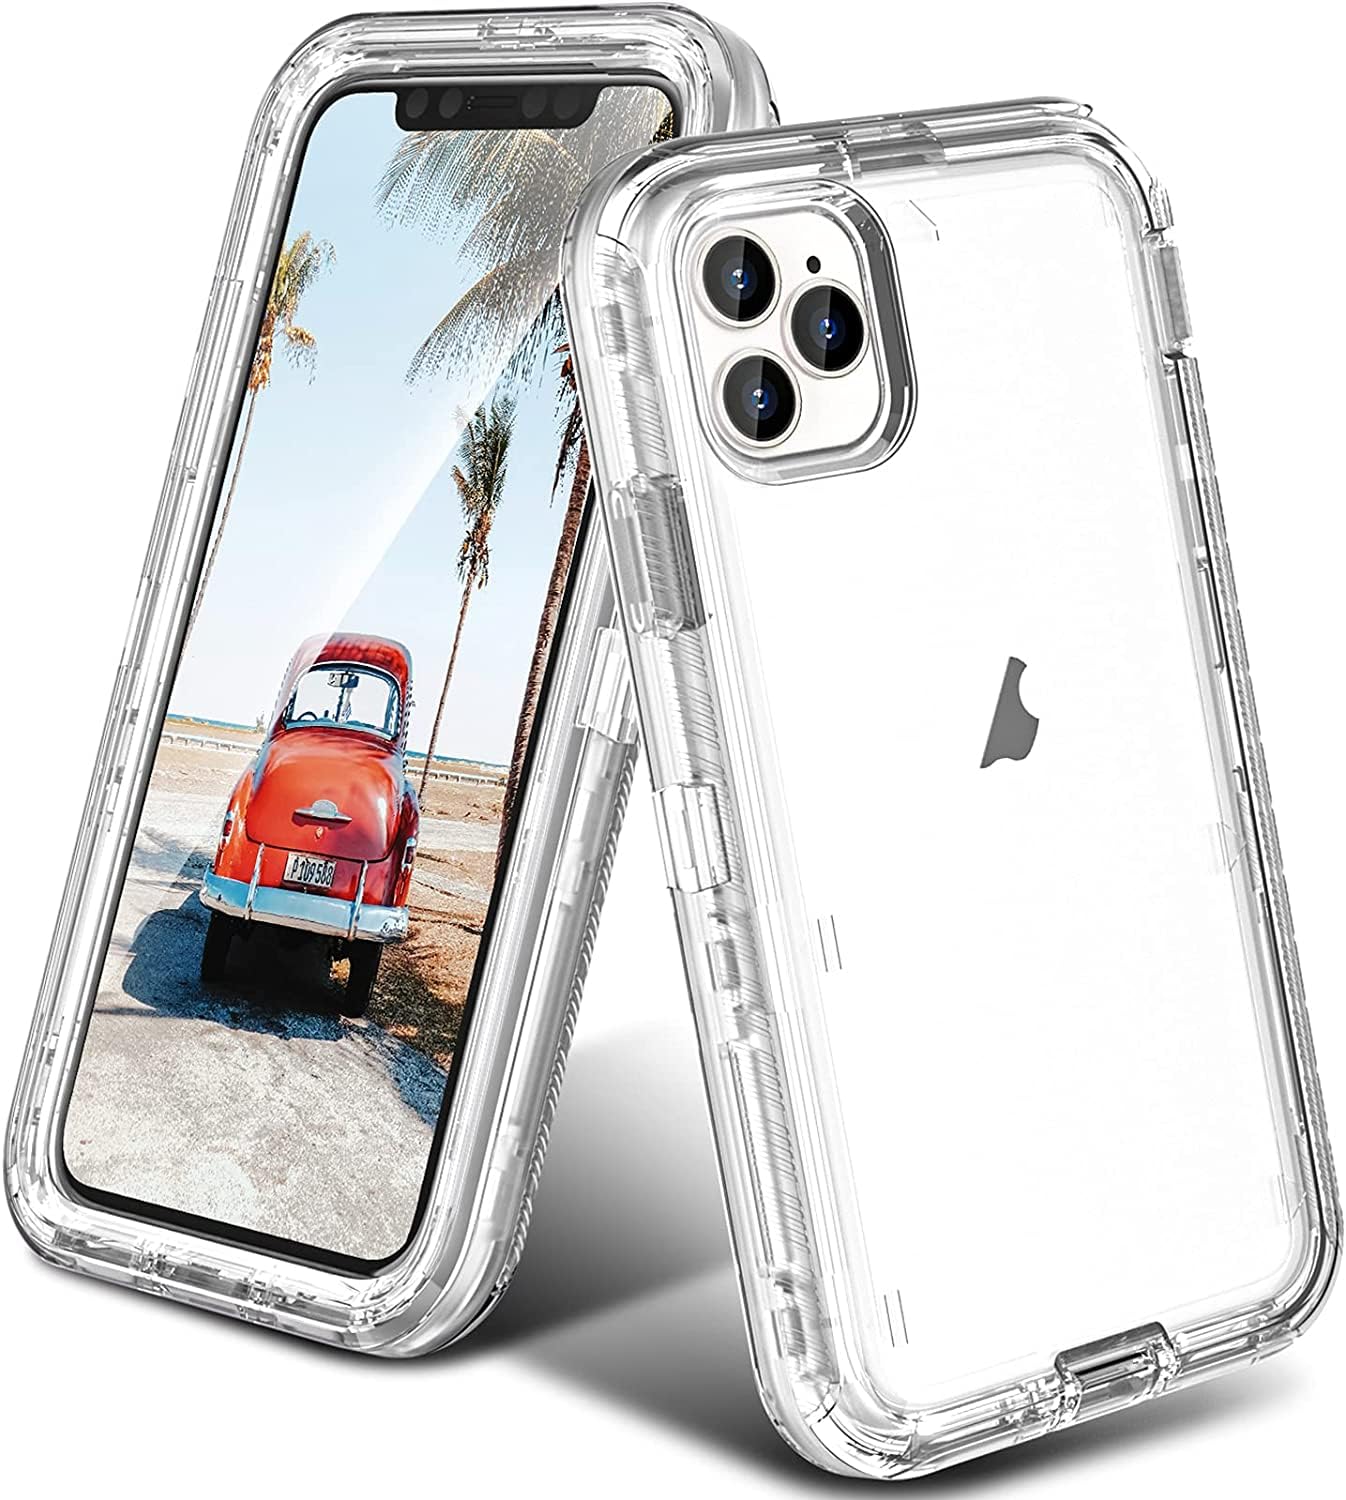 ORIbox for iPhone 14 Pro Max Case Clear, [10 FT Military Grade Drop Protection], Transparent Heavy Duty Shockproof Anti-Fall Case for iPhone 14 Pro Max Phone Case,6.1 inch,3 in 1, Crystal Clear